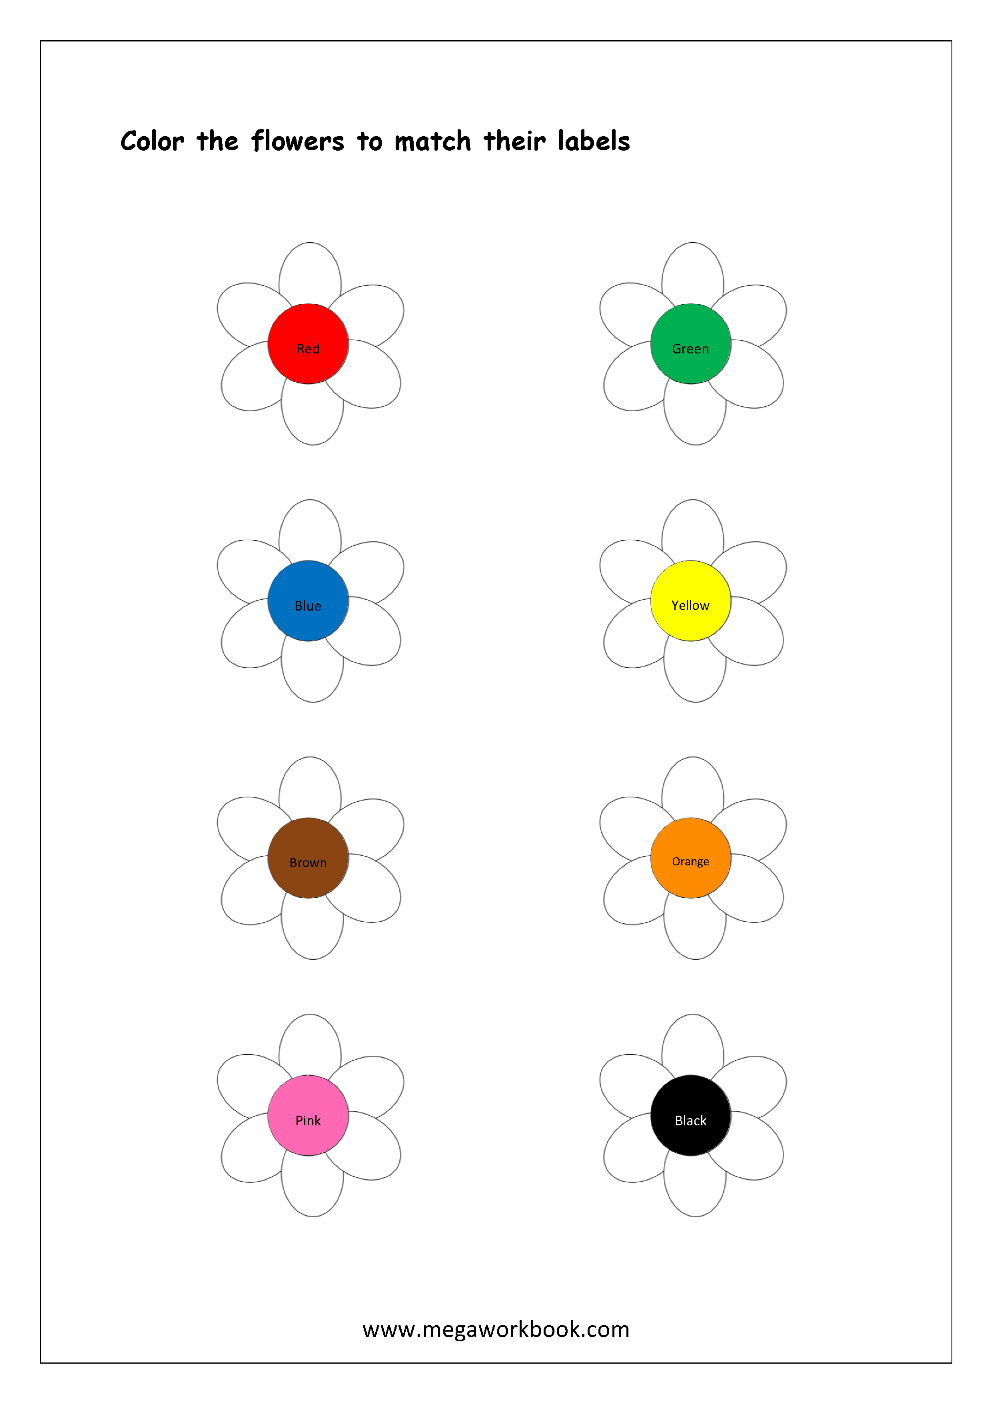 Free Printable Color Recognition Worksheets - Colormatching Hint | Color Recognition Worksheets Free Printable